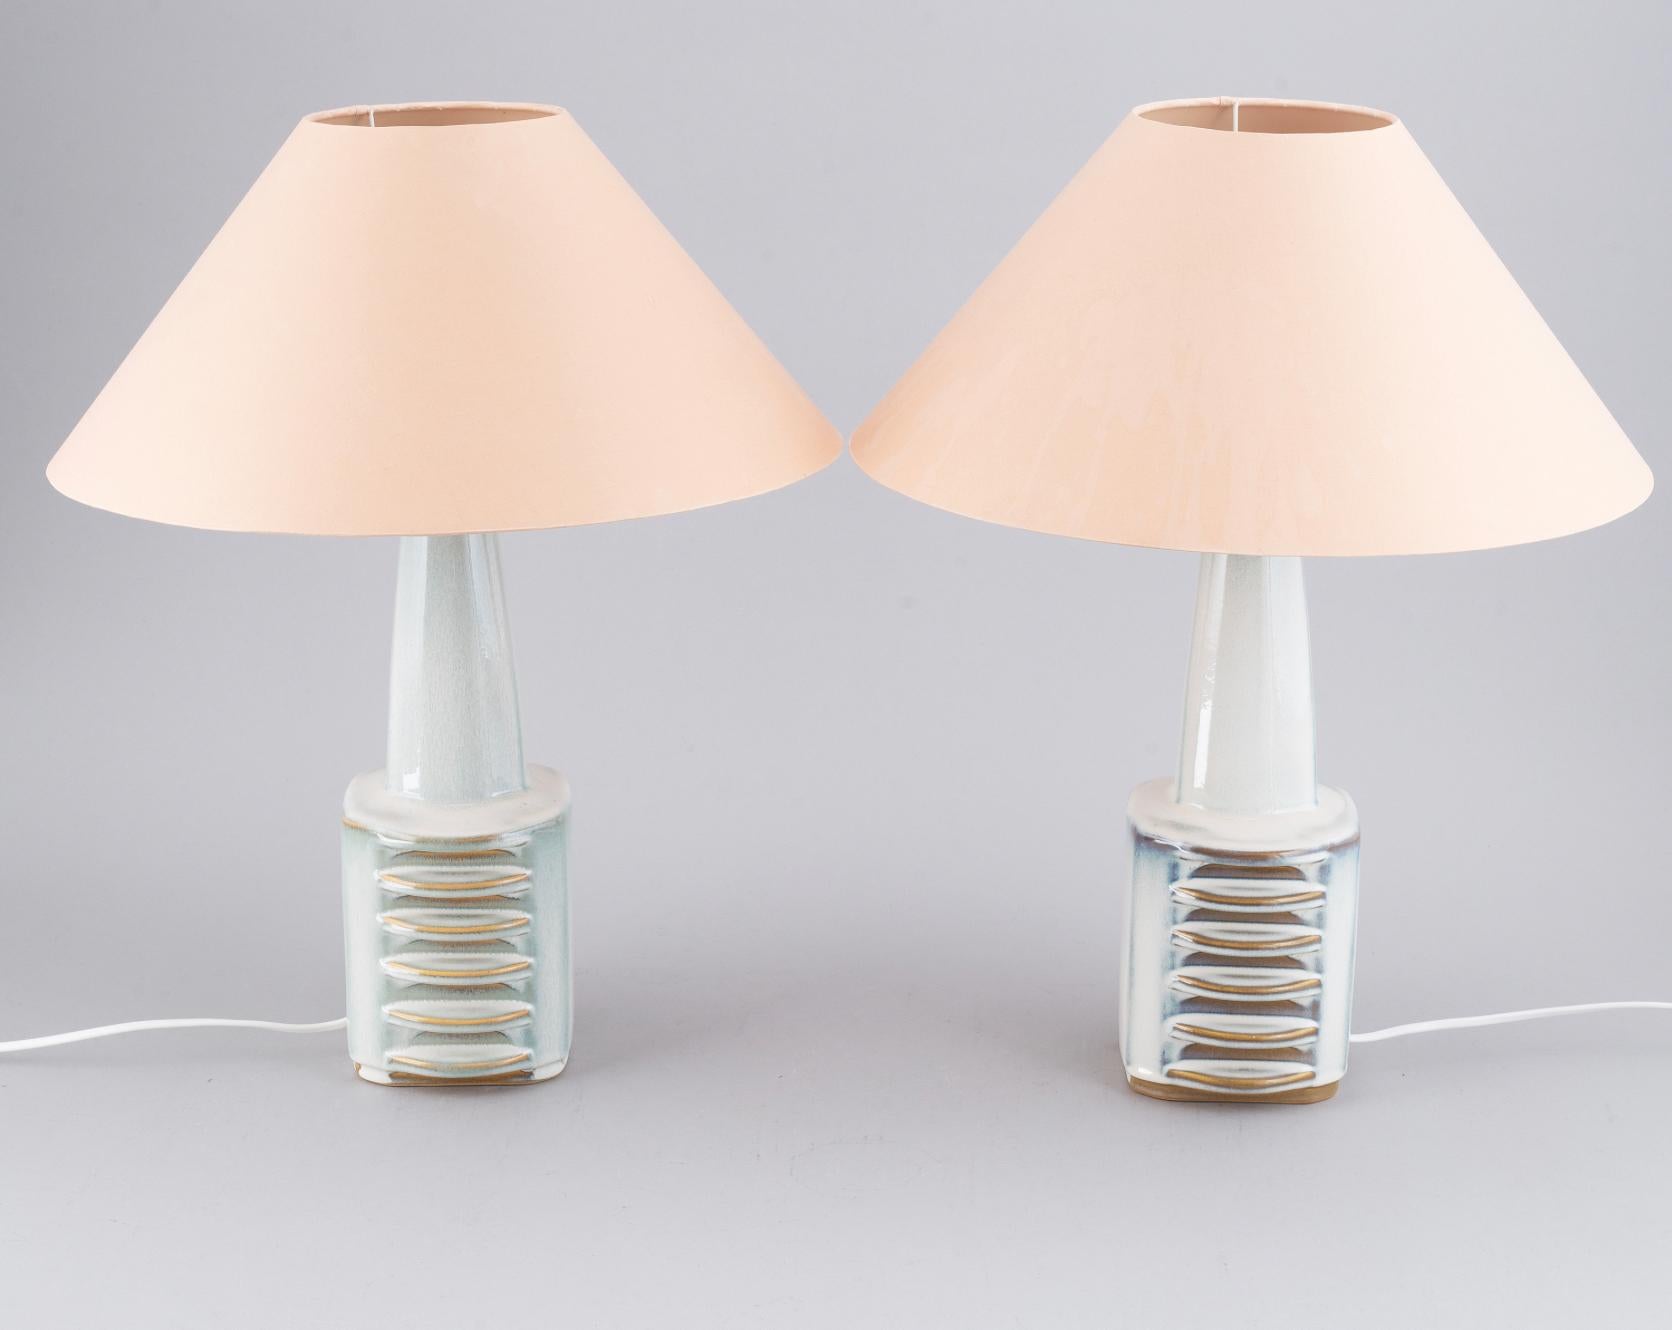 A pair of stoneware table lights, by Einar Johansen for Søholm, Denmark, 1950's/60's.
Signed and marked by manufacturer. 
The shades not available.
Rewiring available upon request.
Can be sold individually.